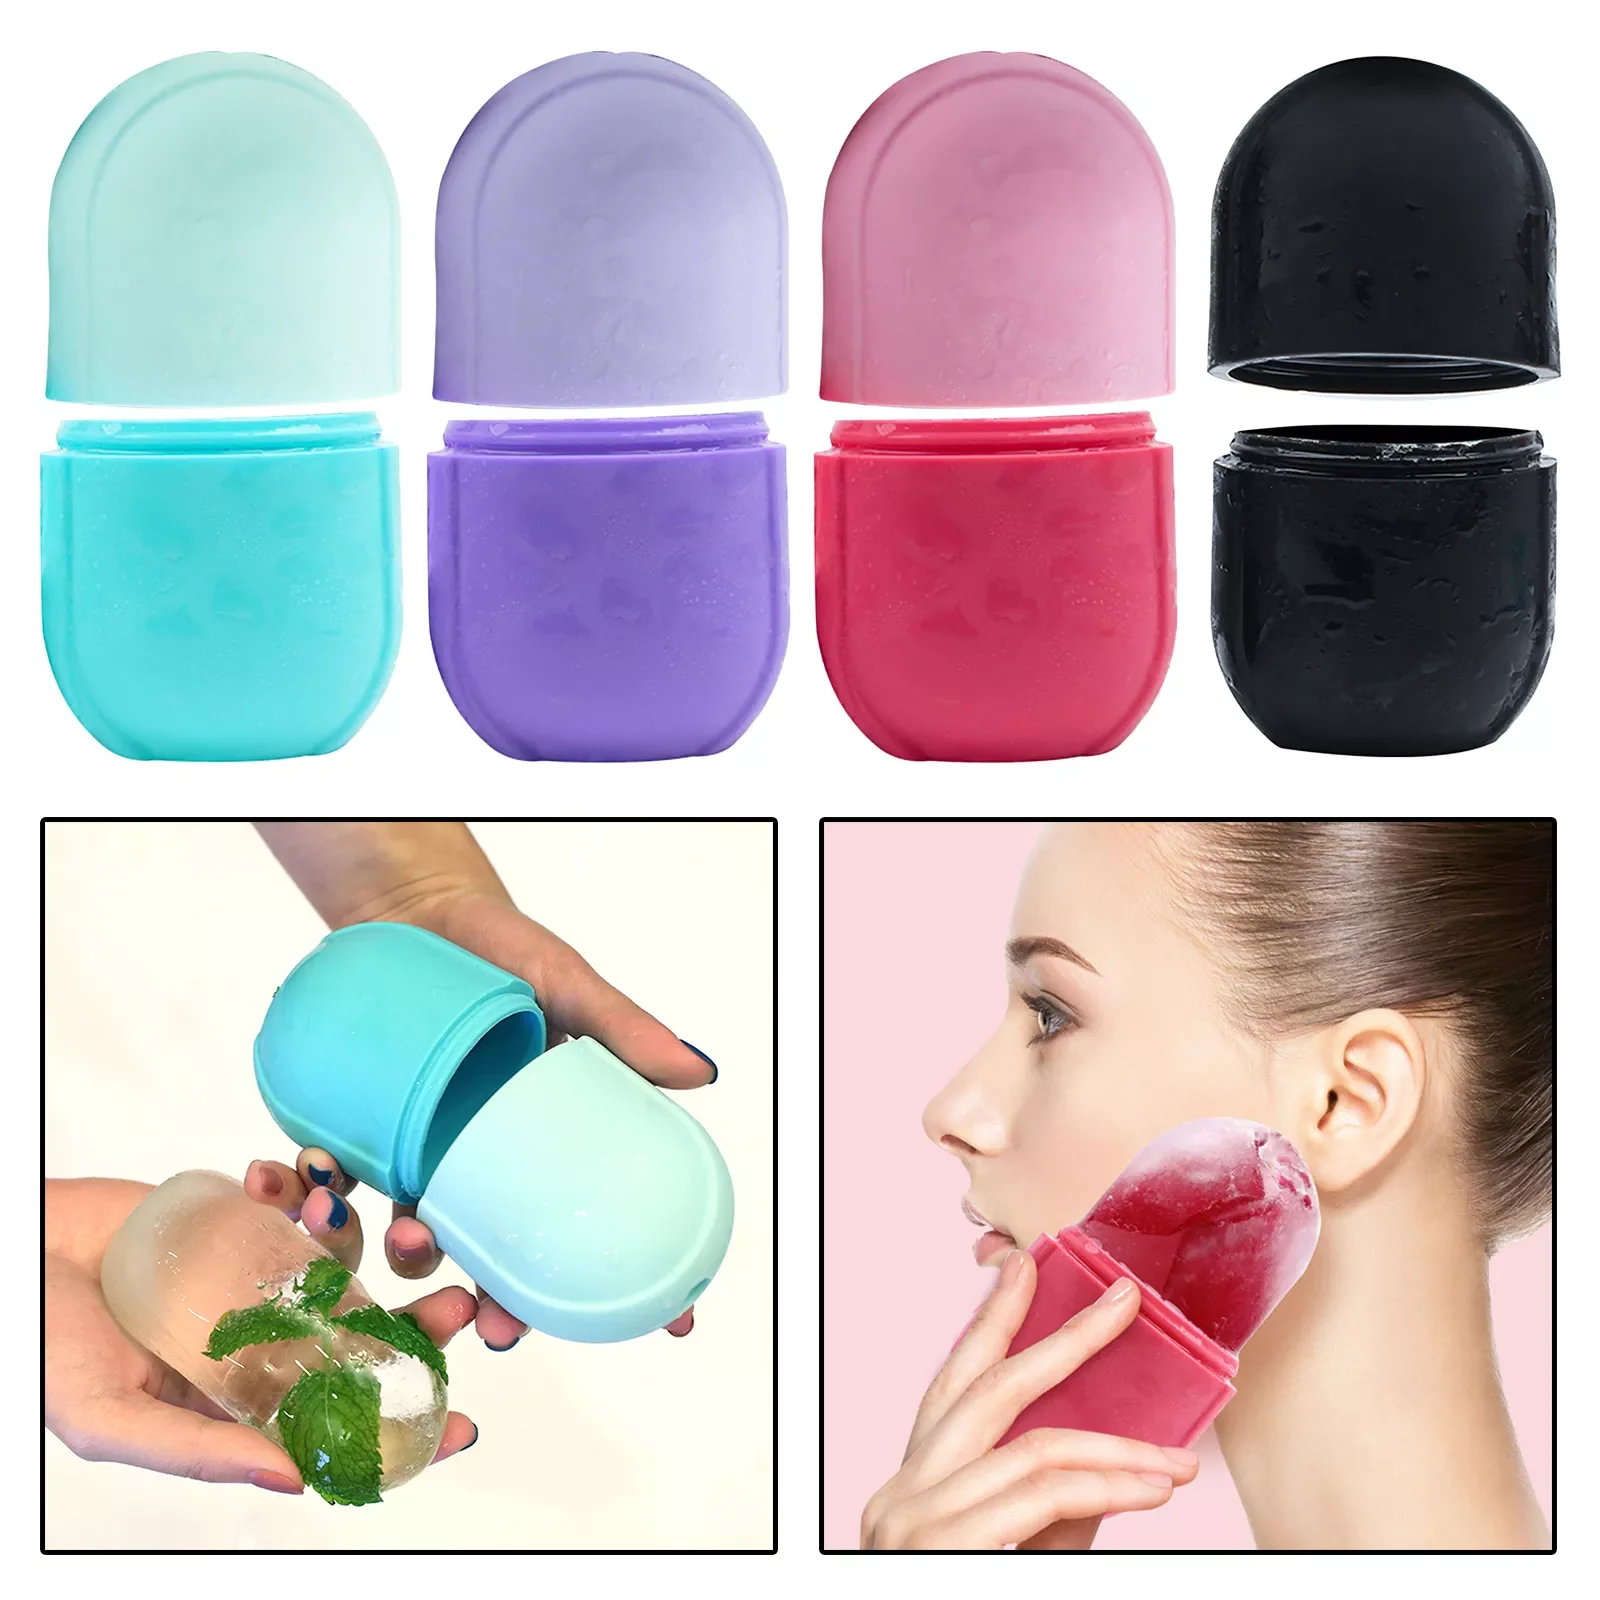 

2Pcs Ice Massage Cups Cold Massage Roller Tool Freezable for Muscle Body Muscles Stiffness Joint Back Pain Relief Inflammation